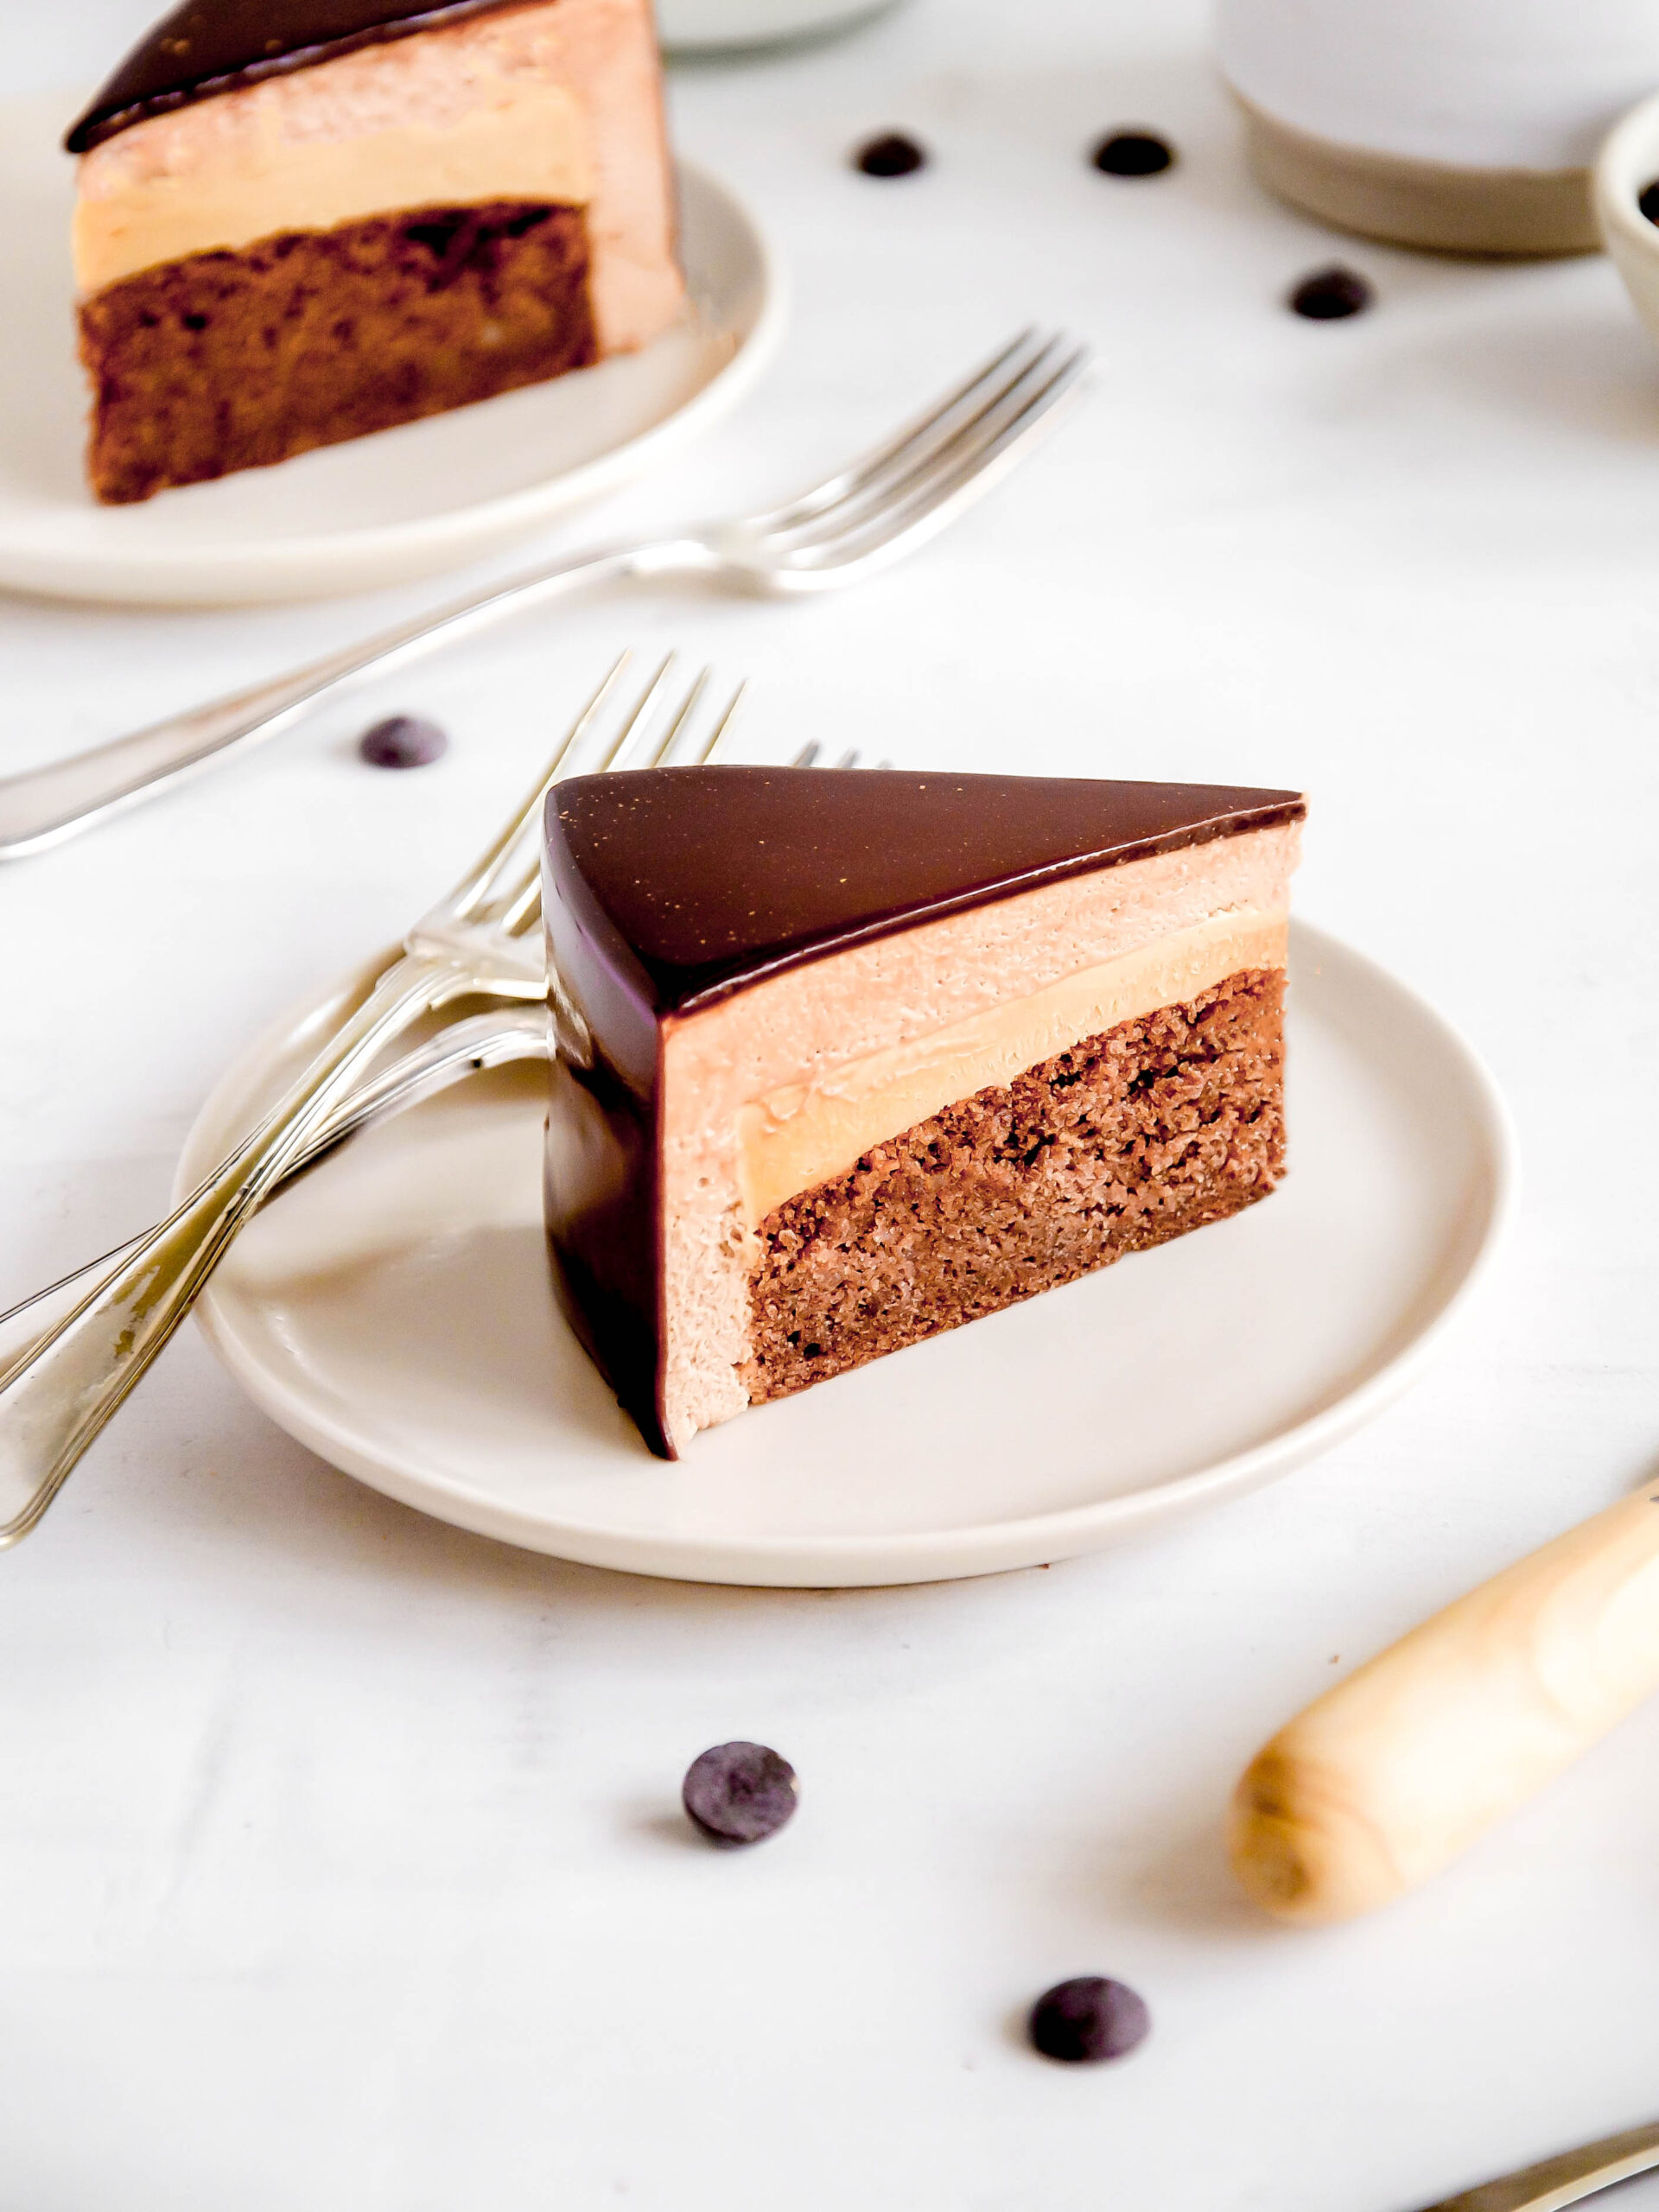 chocolate and caramel mousse cake slice on a plate.